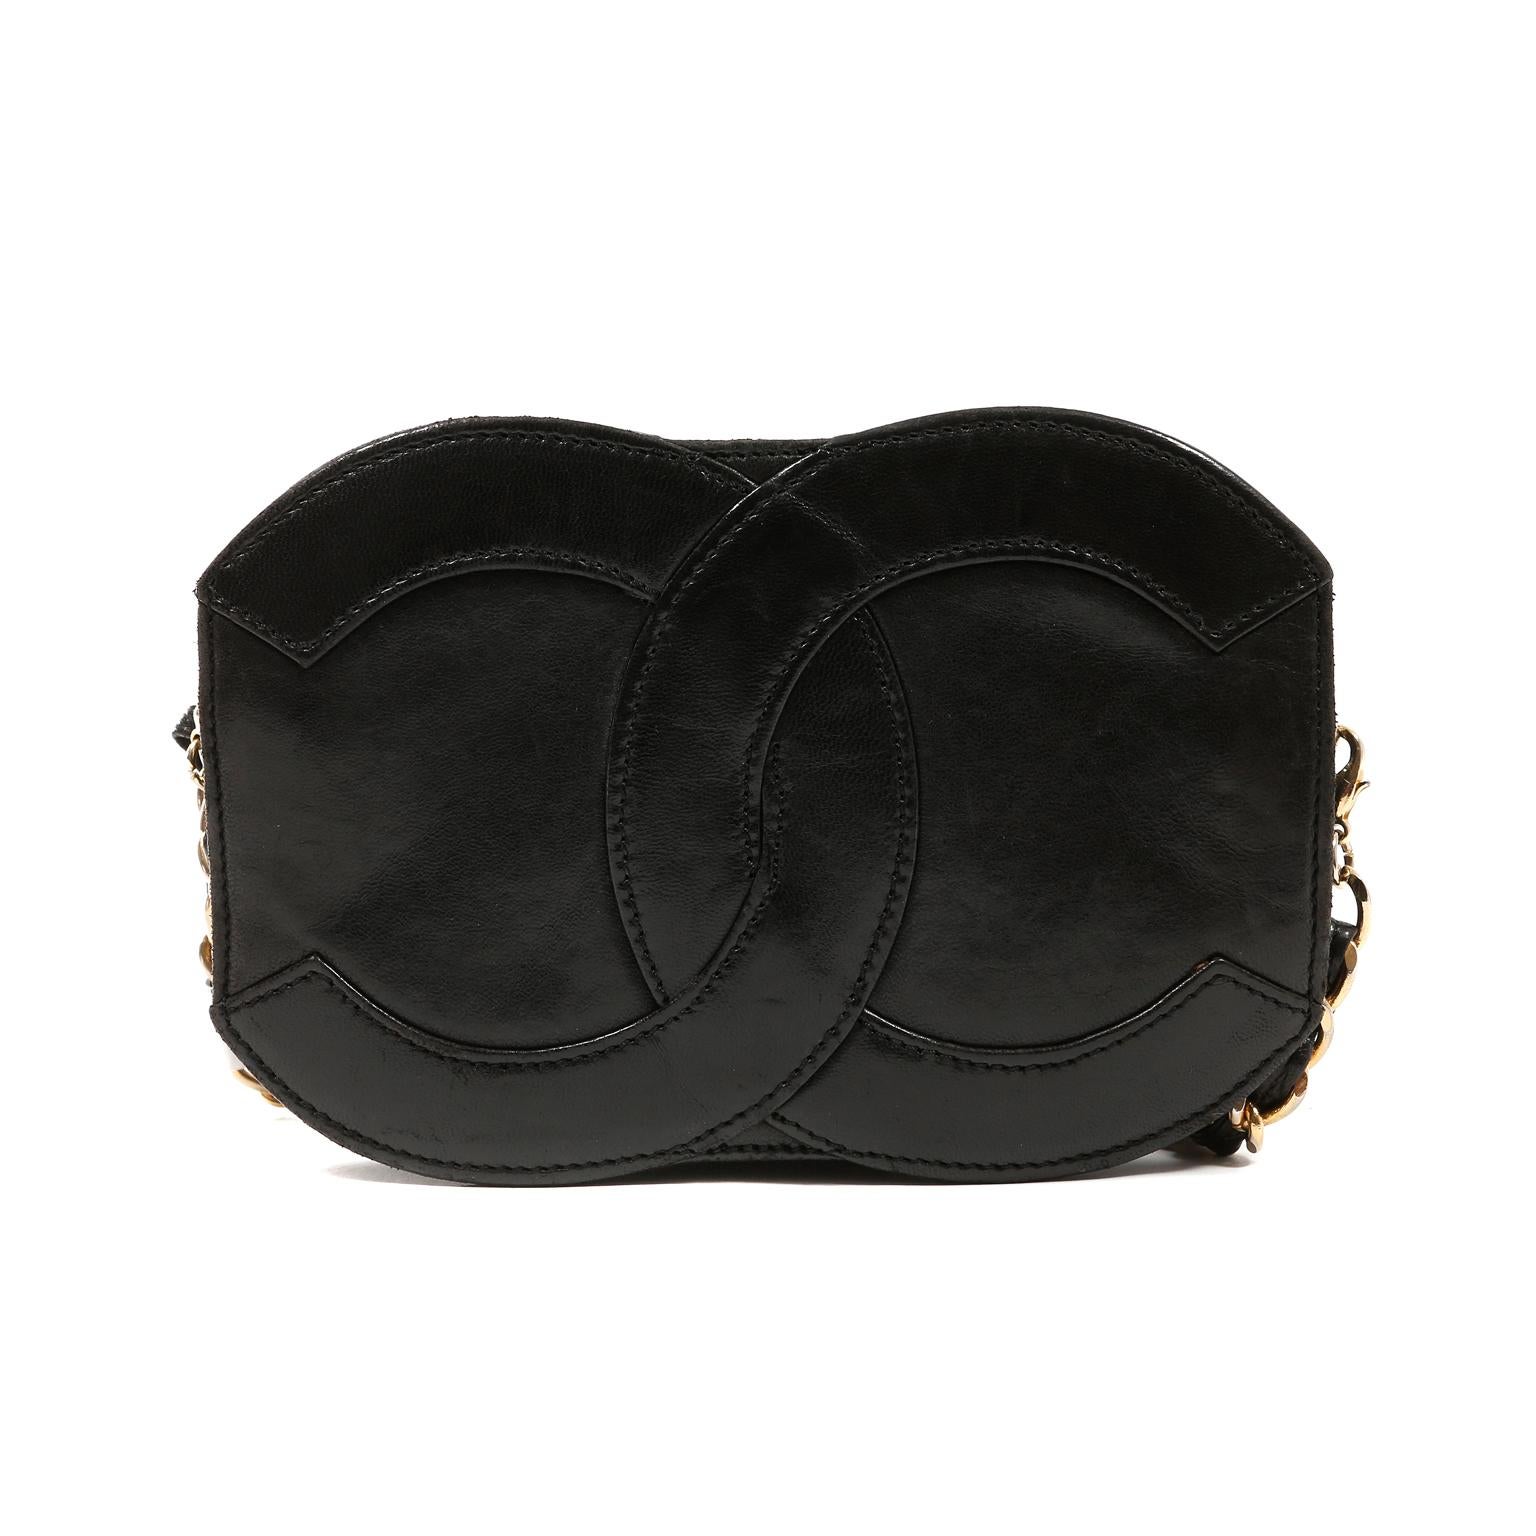 This authentic Chanel Black Leather CC Vintage Crossbody Bag is in very good condition.  It is a highly collectible vintage piece that has enjoyed a previous life.  
Small black leather crossbody is shaped in interlocking CC silhouette.  Zippered